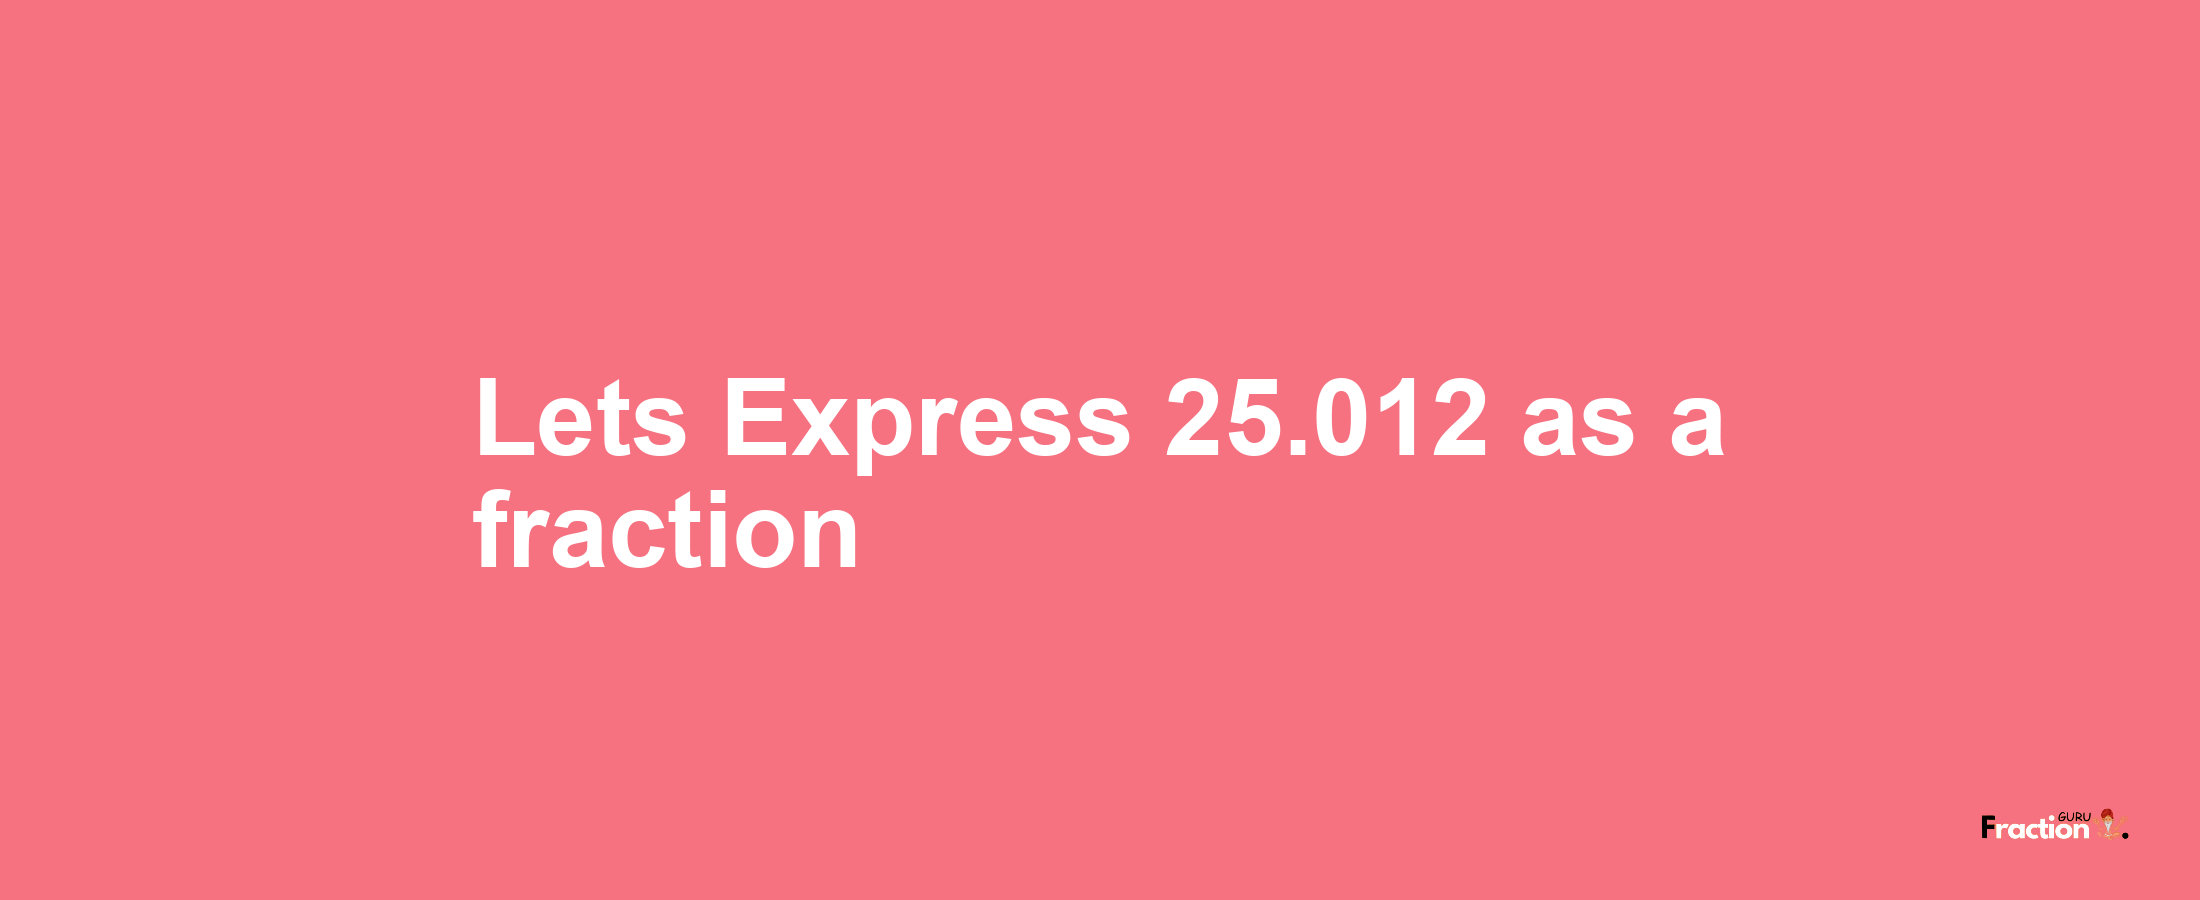 Lets Express 25.012 as afraction